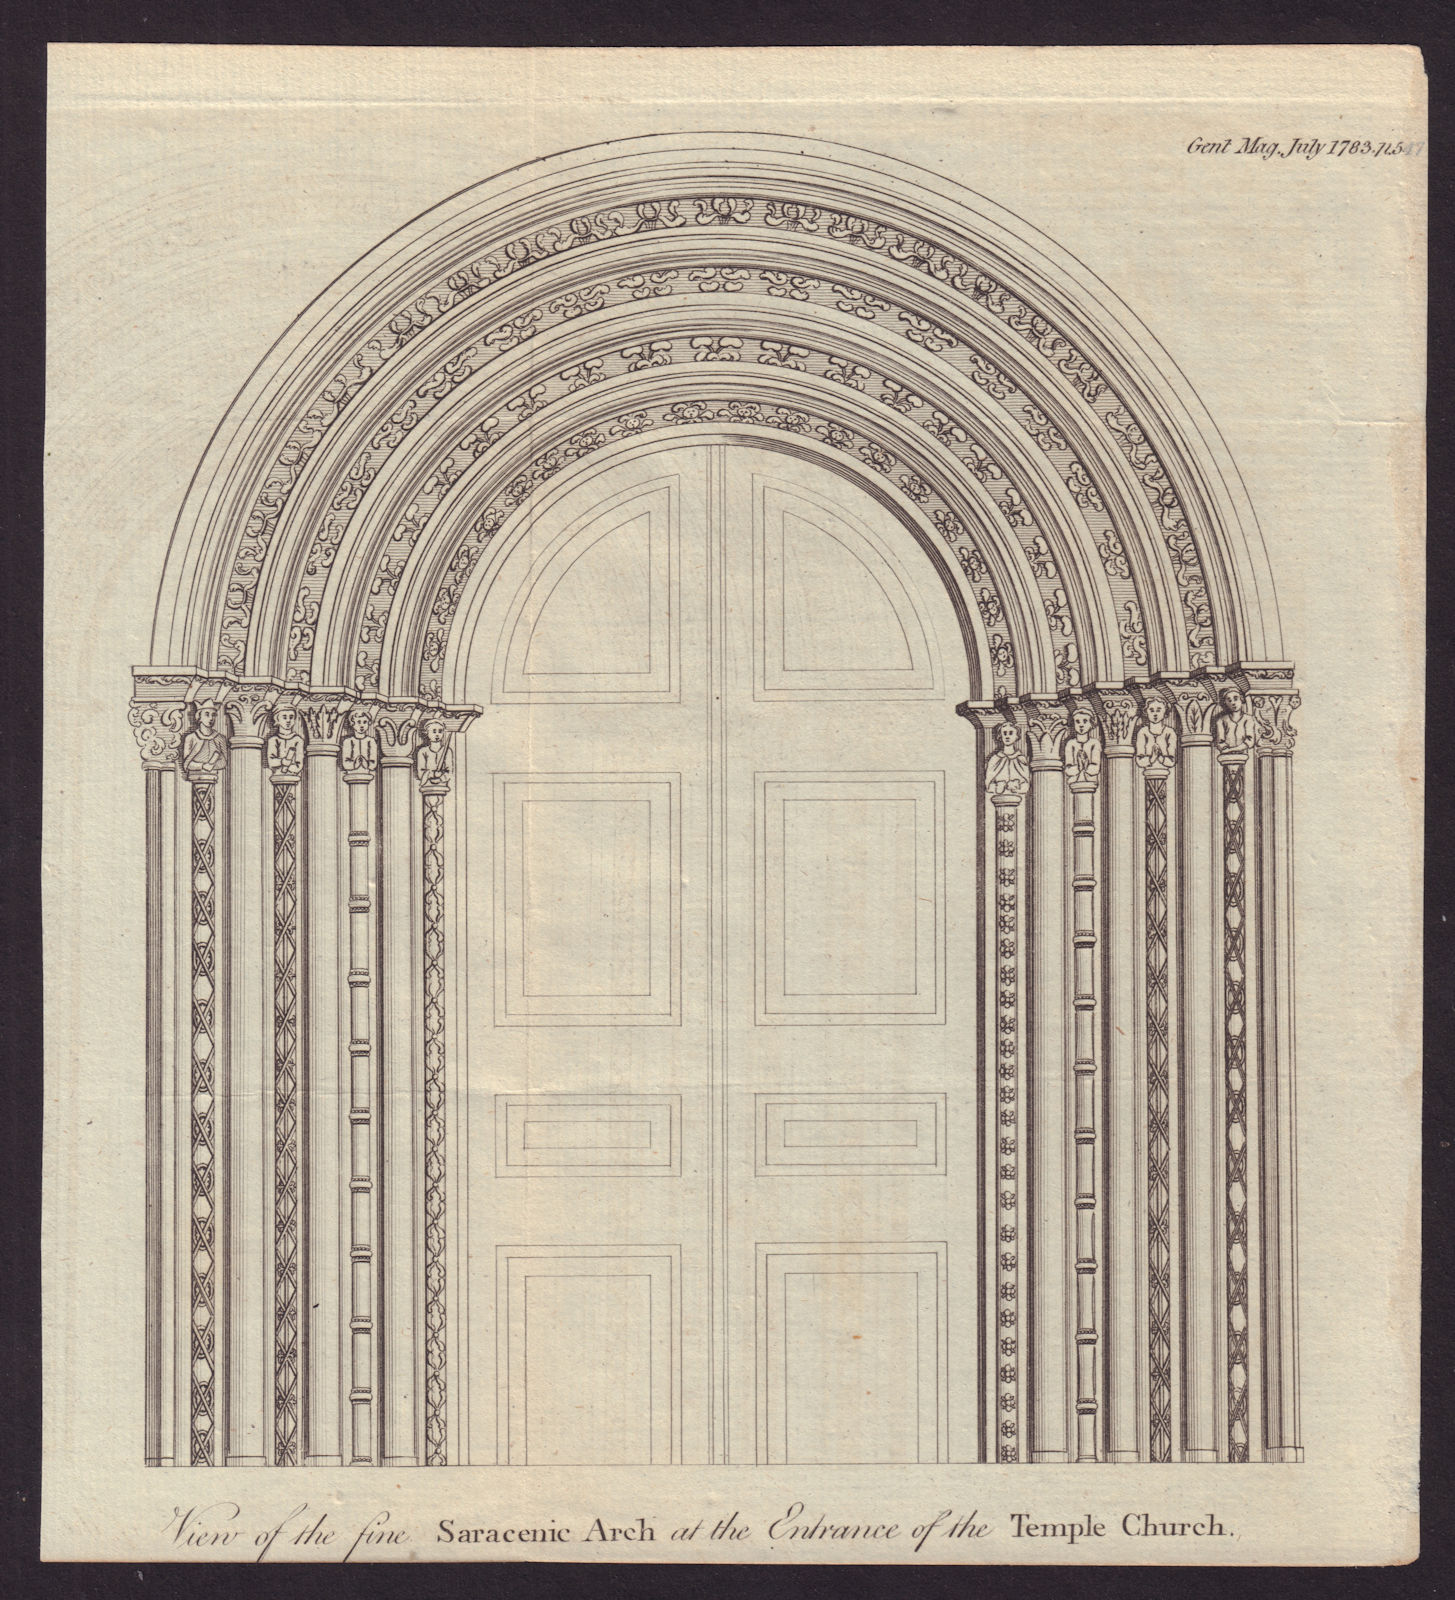 Associate Product The Saracenic Arch at the Entrance of the Temple Church, London 1783 old print